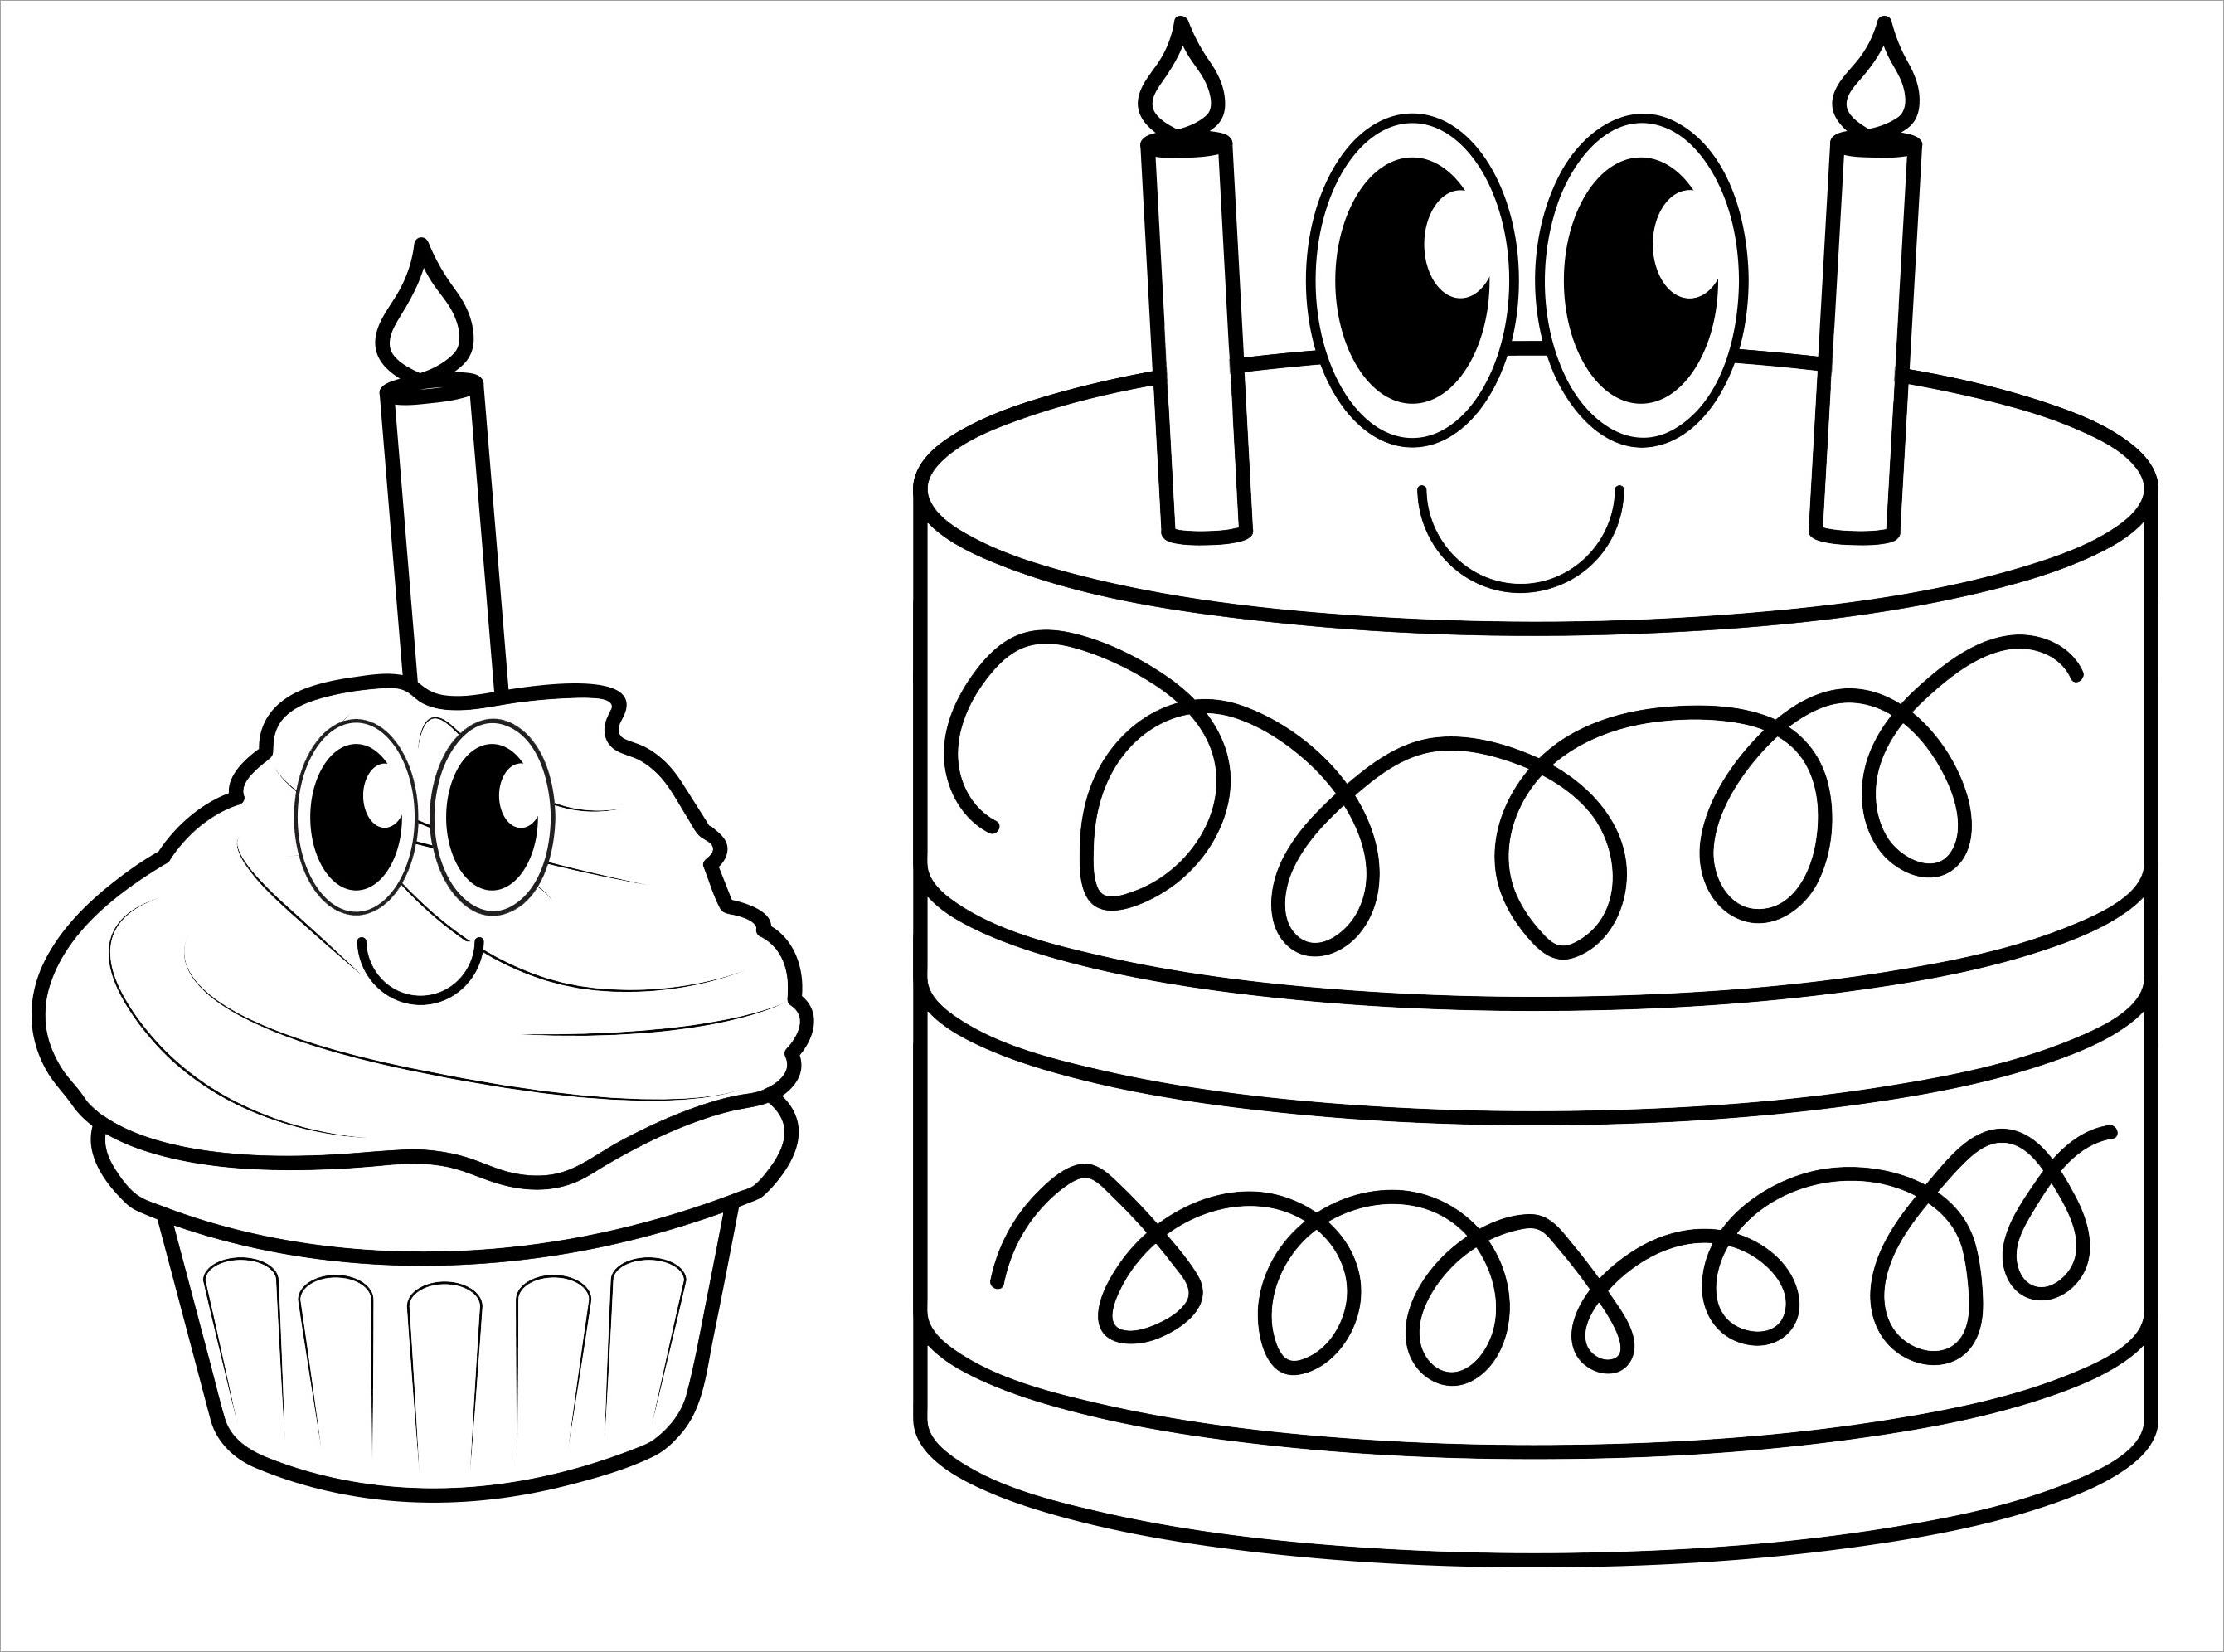 Cute birthday cake coloring page